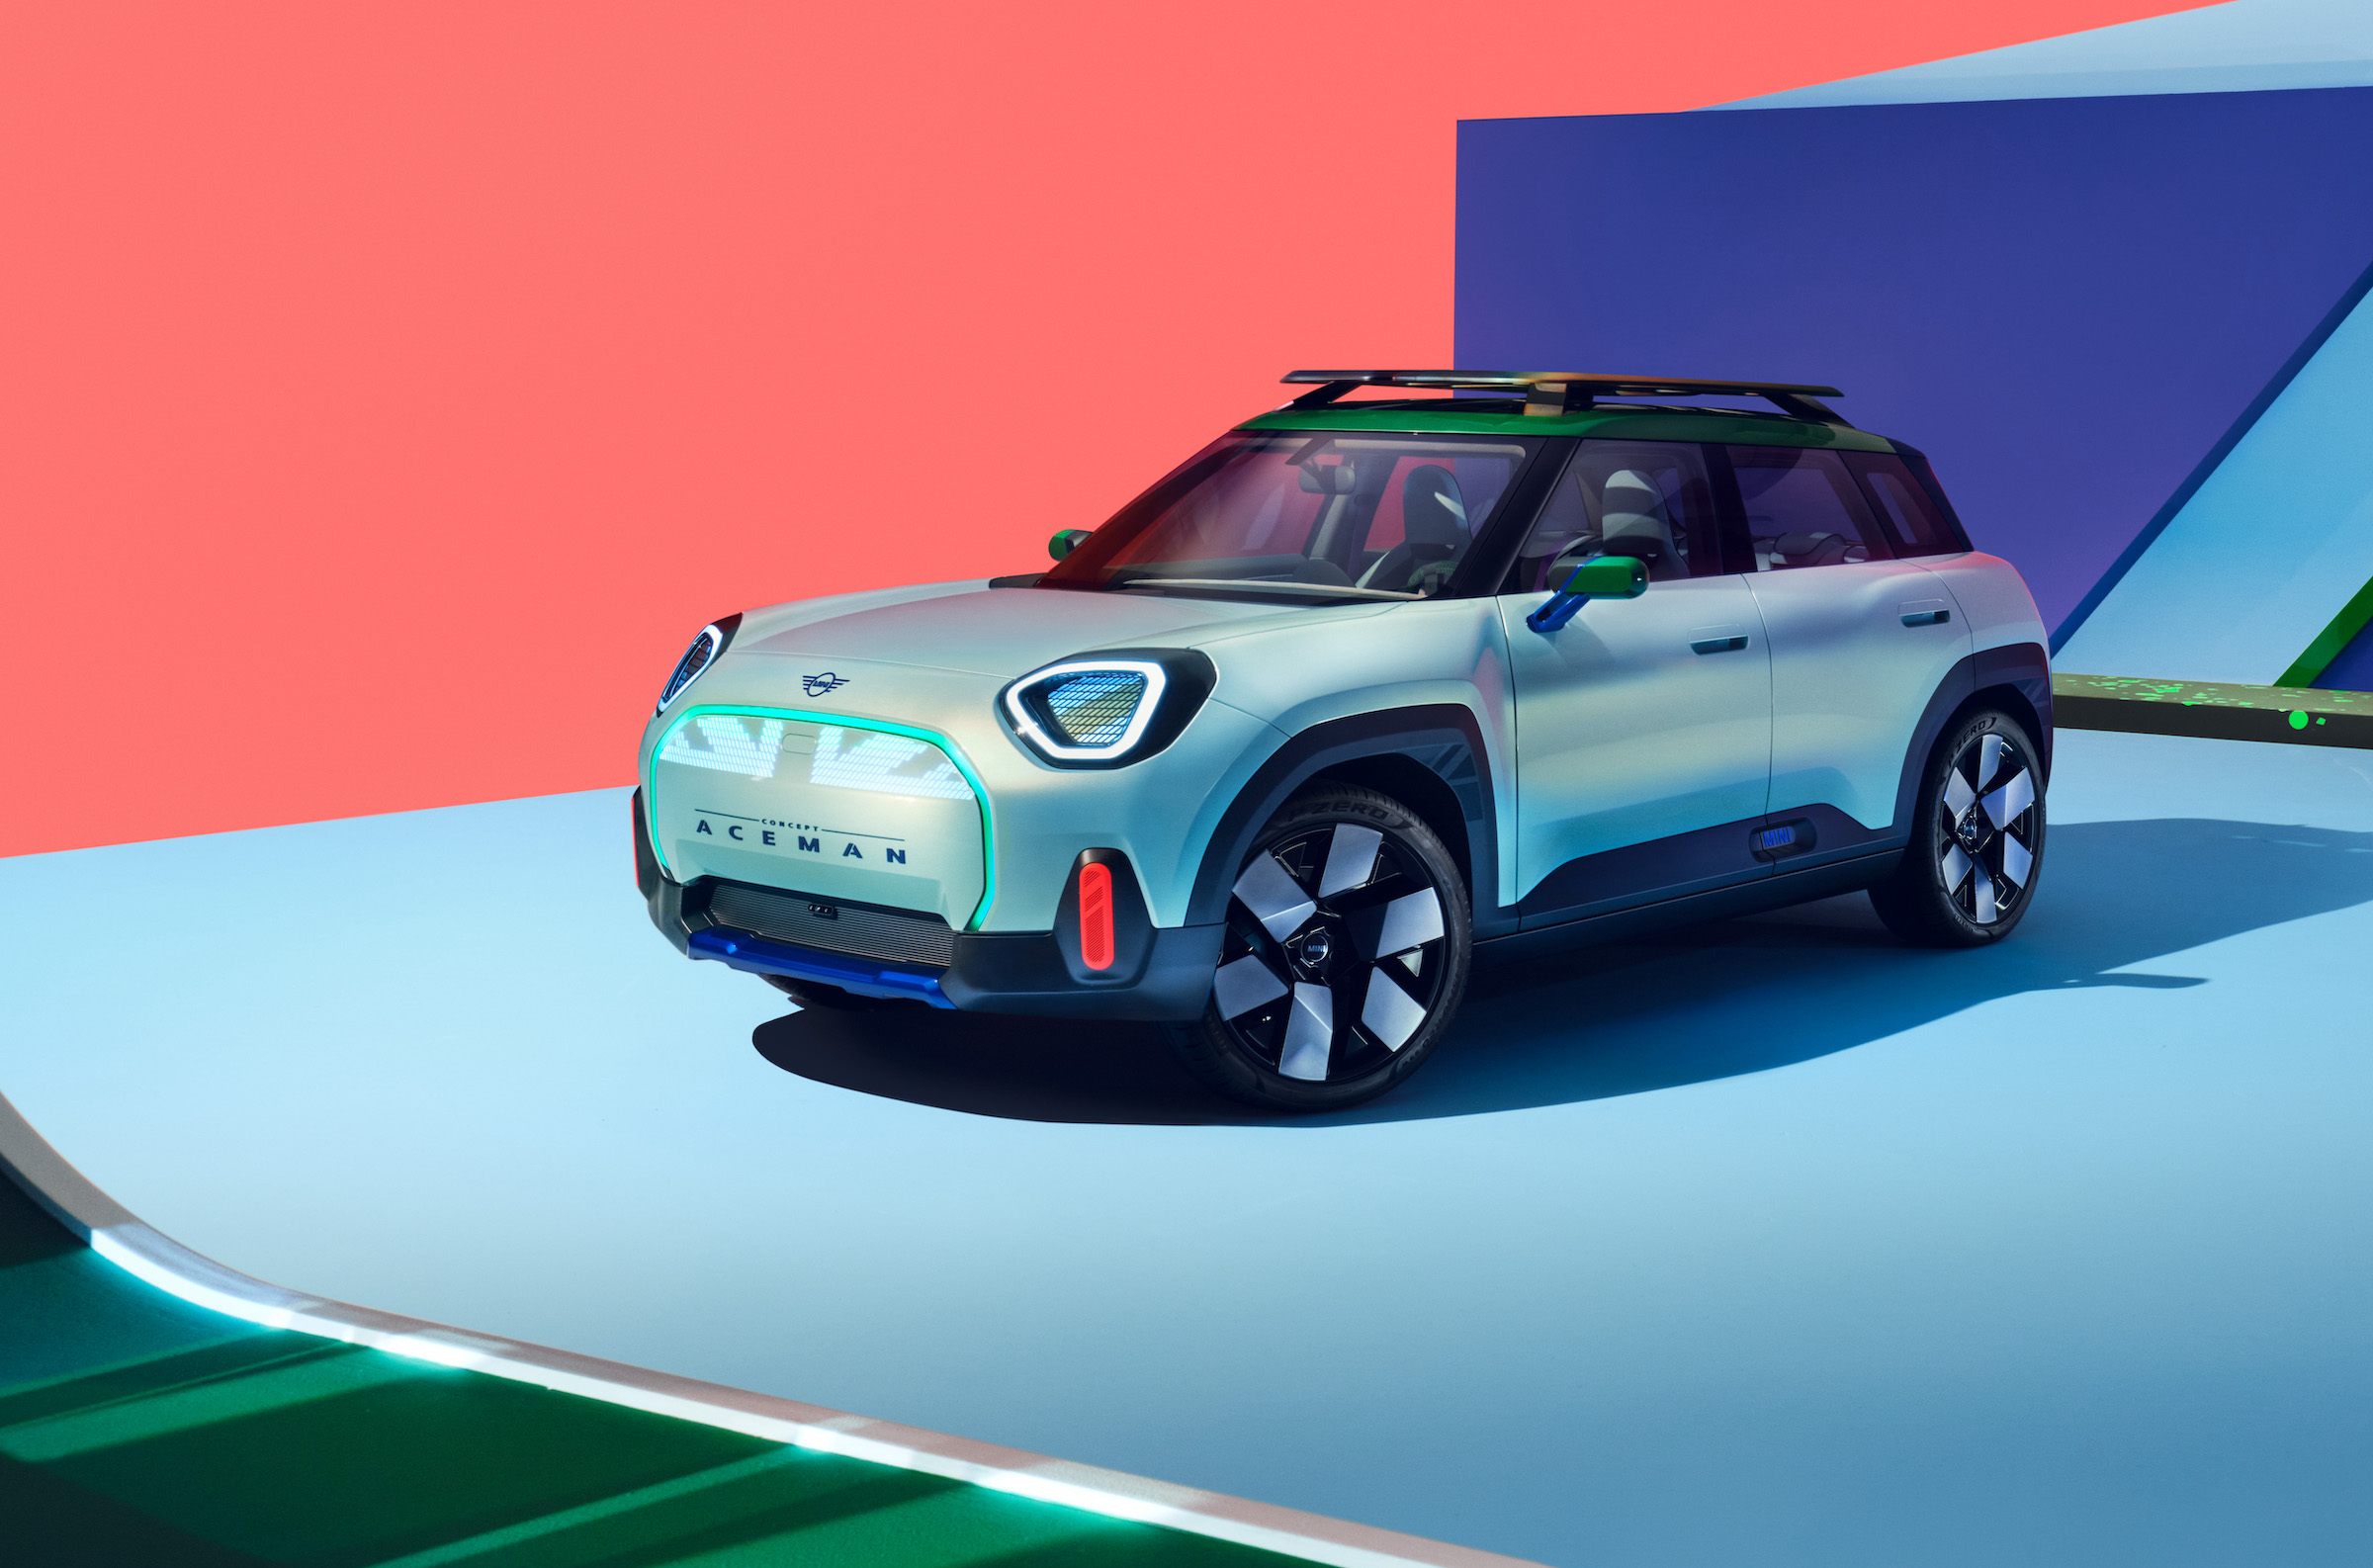 Aceman concept previews first dedicated electric Mini